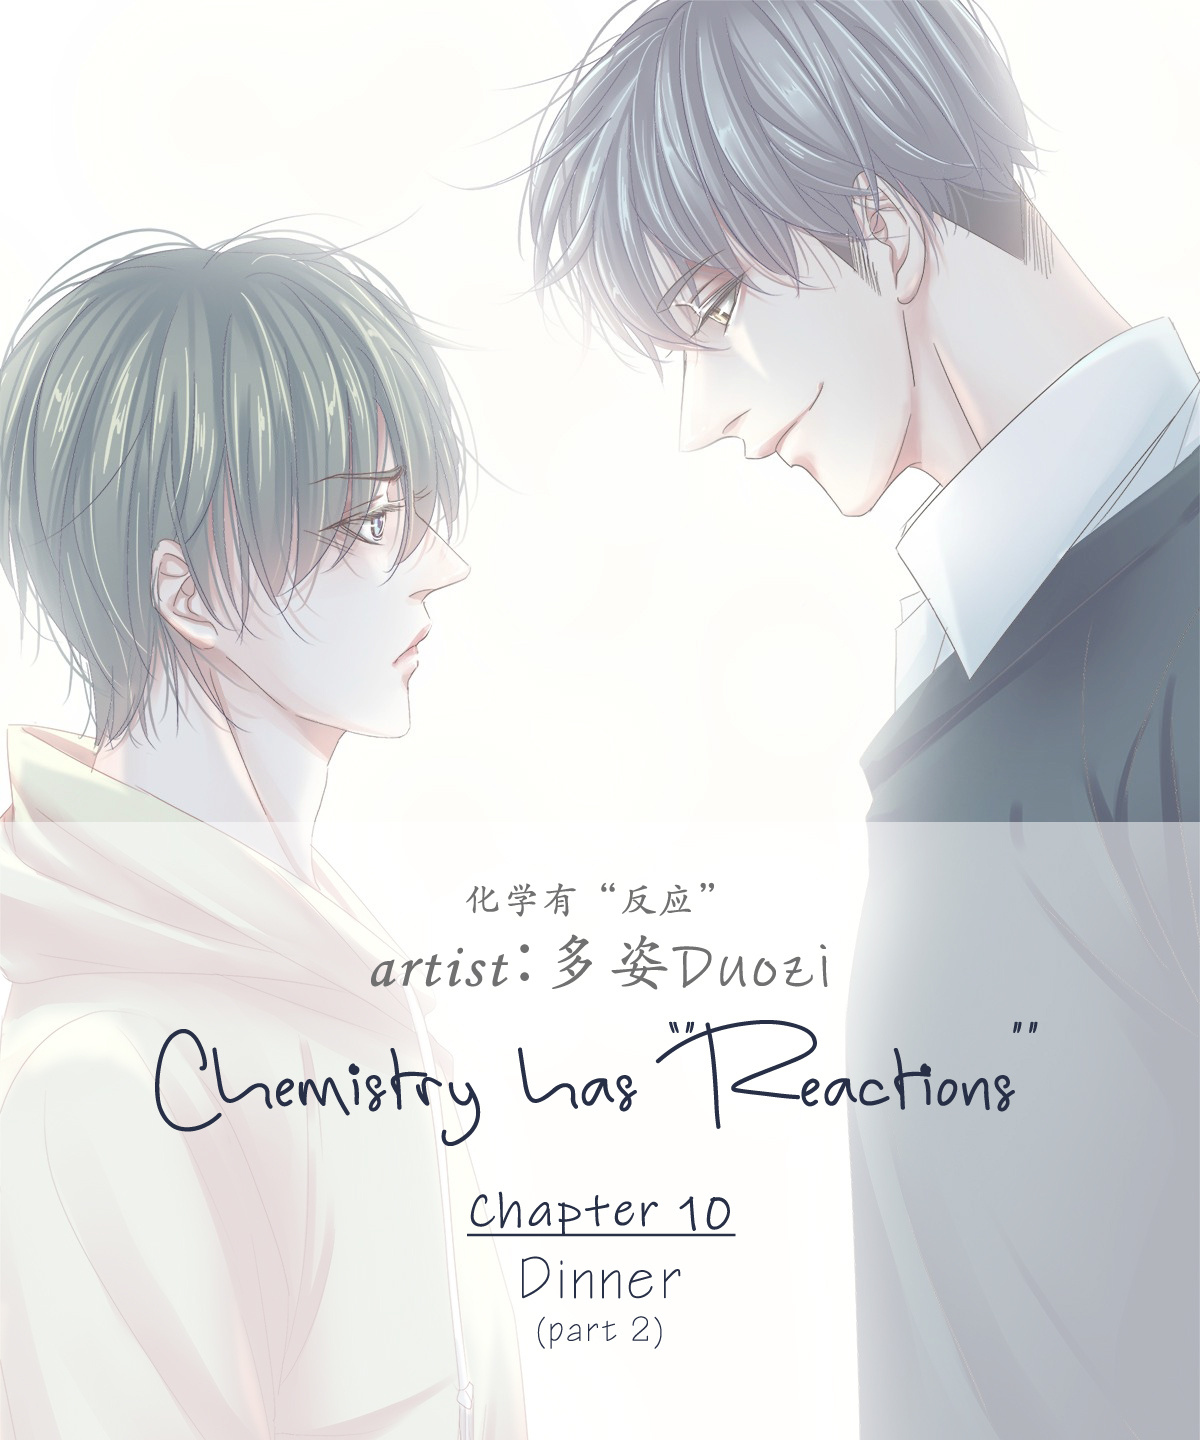 Chemistry Has "reactions" Chapter 10 #1